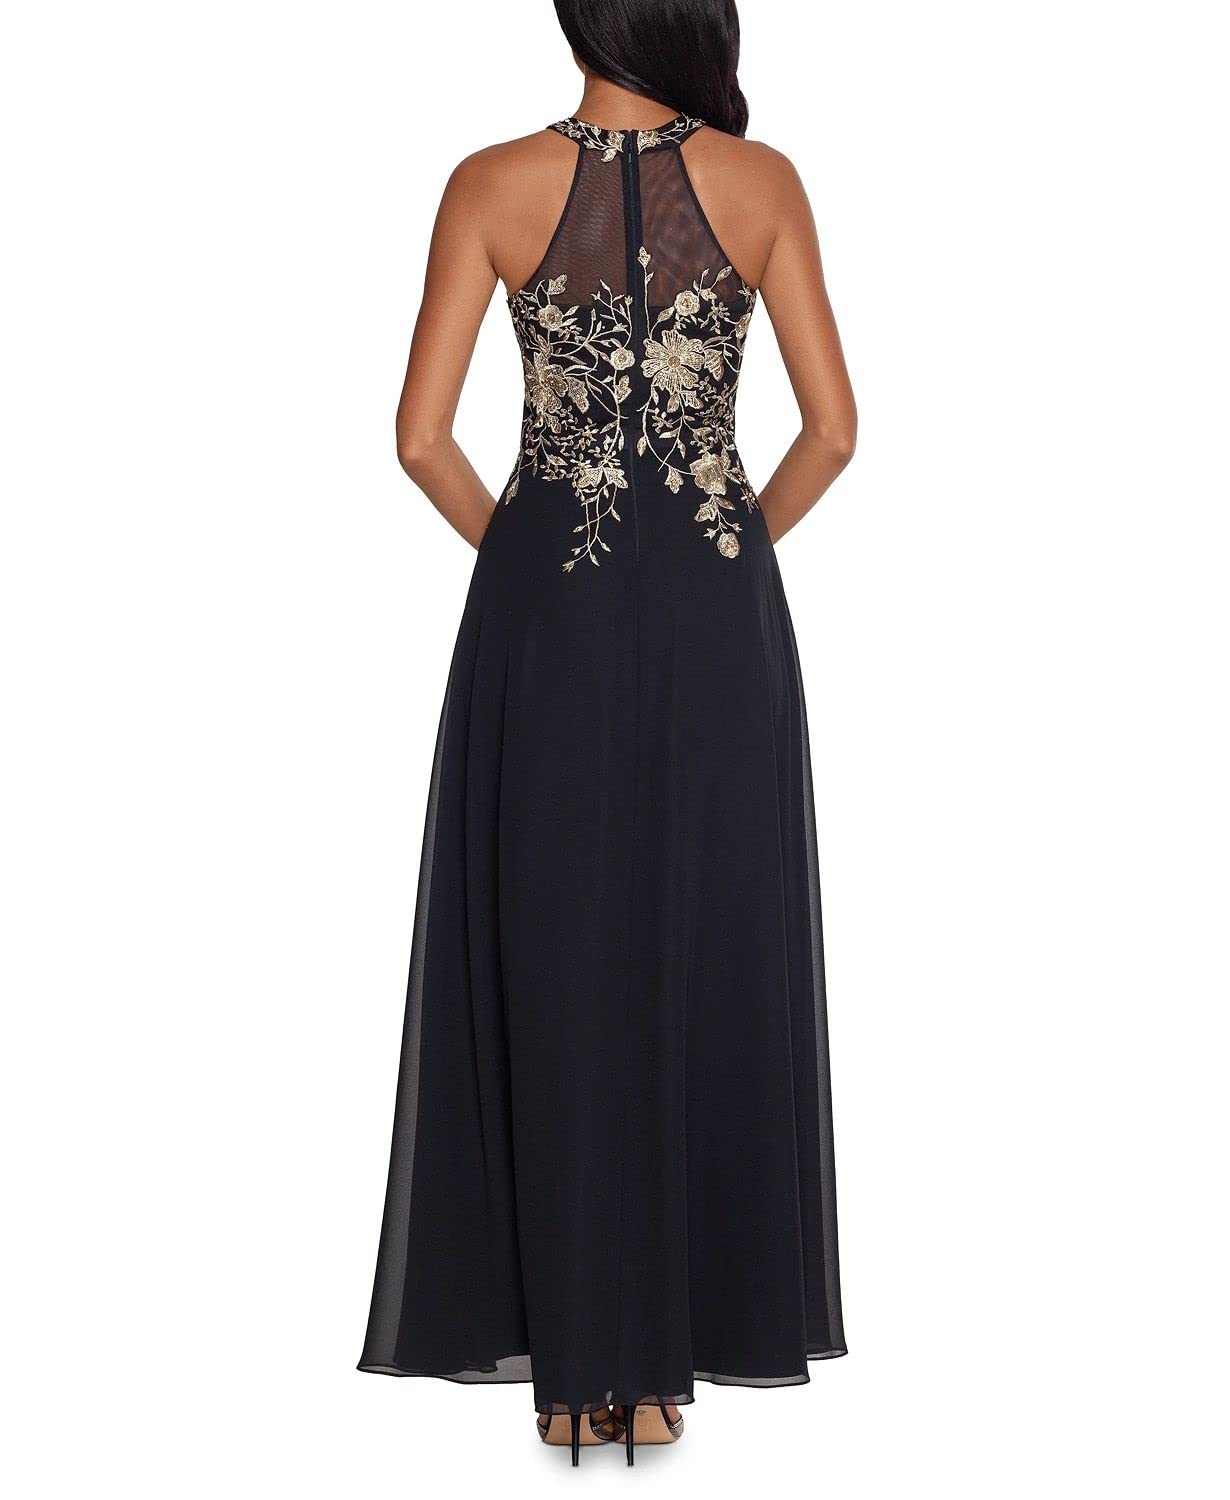 Betsy & Adam Women's Petite Long Embroidered Halter Chiffon Gown